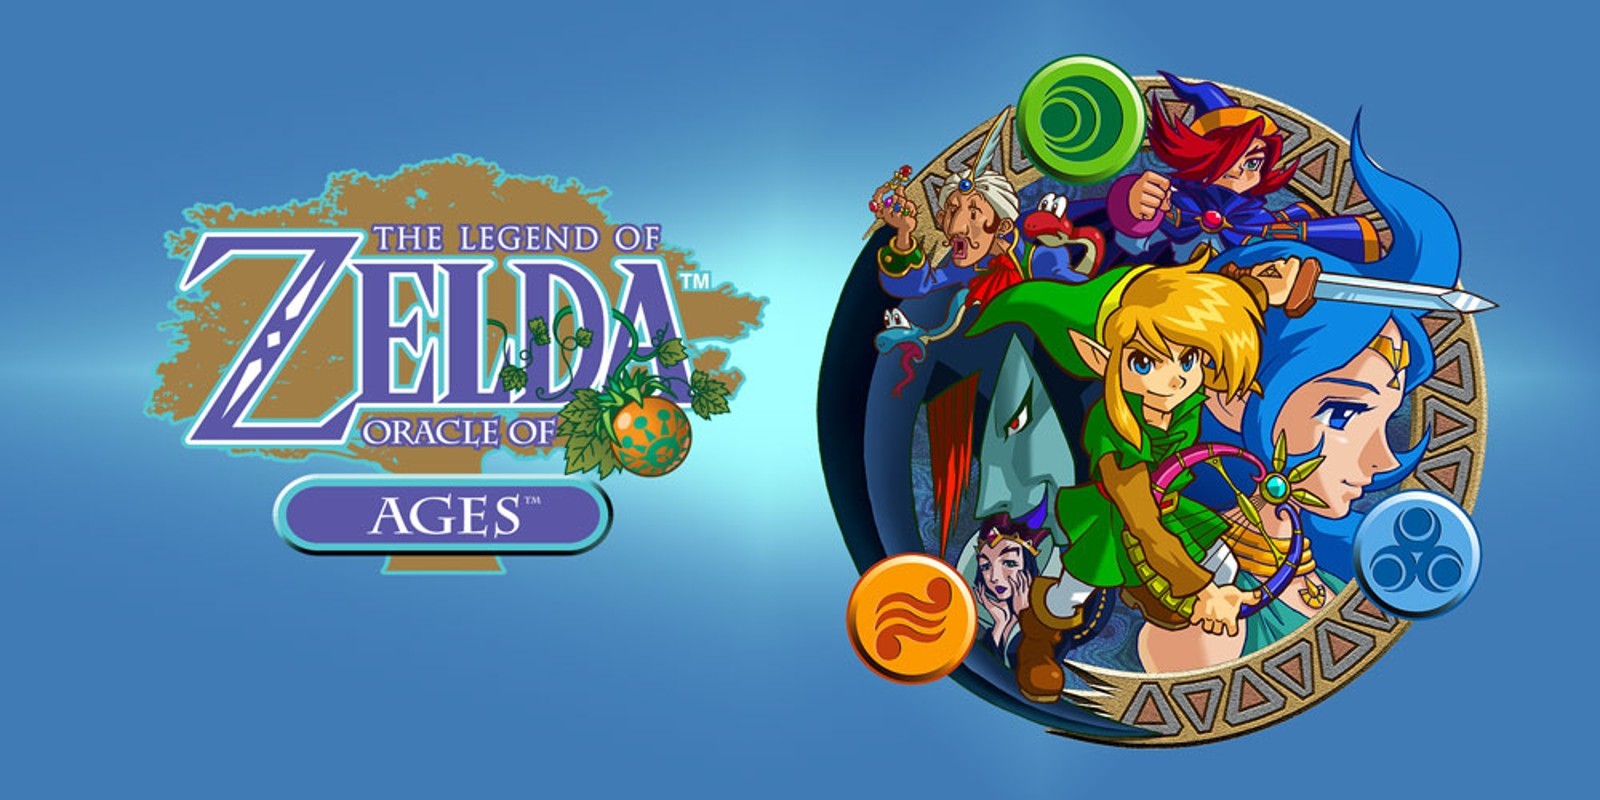 The Legend of Zelda: Oracle of Ages y The Legend of Zelda: Oracle of Seasons. Nintendo.